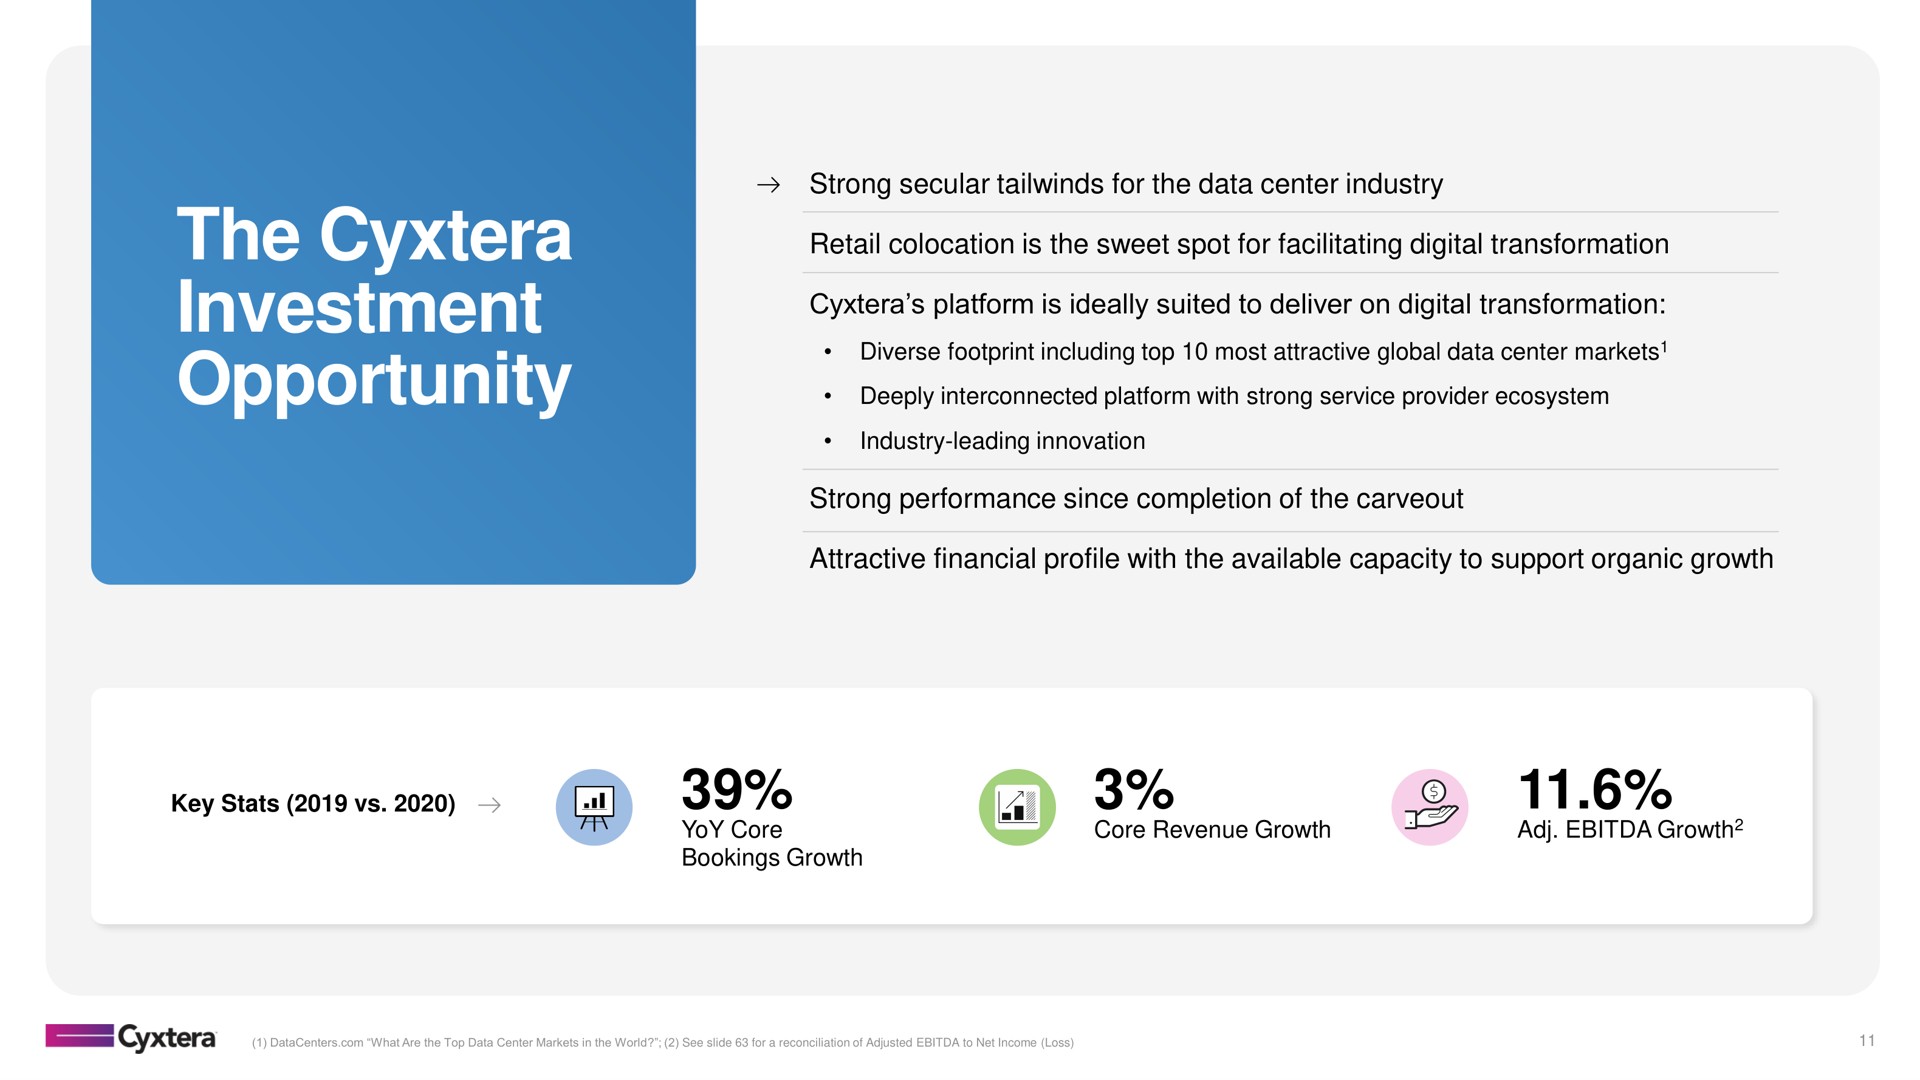 the investment opportunity key | Cyxtera